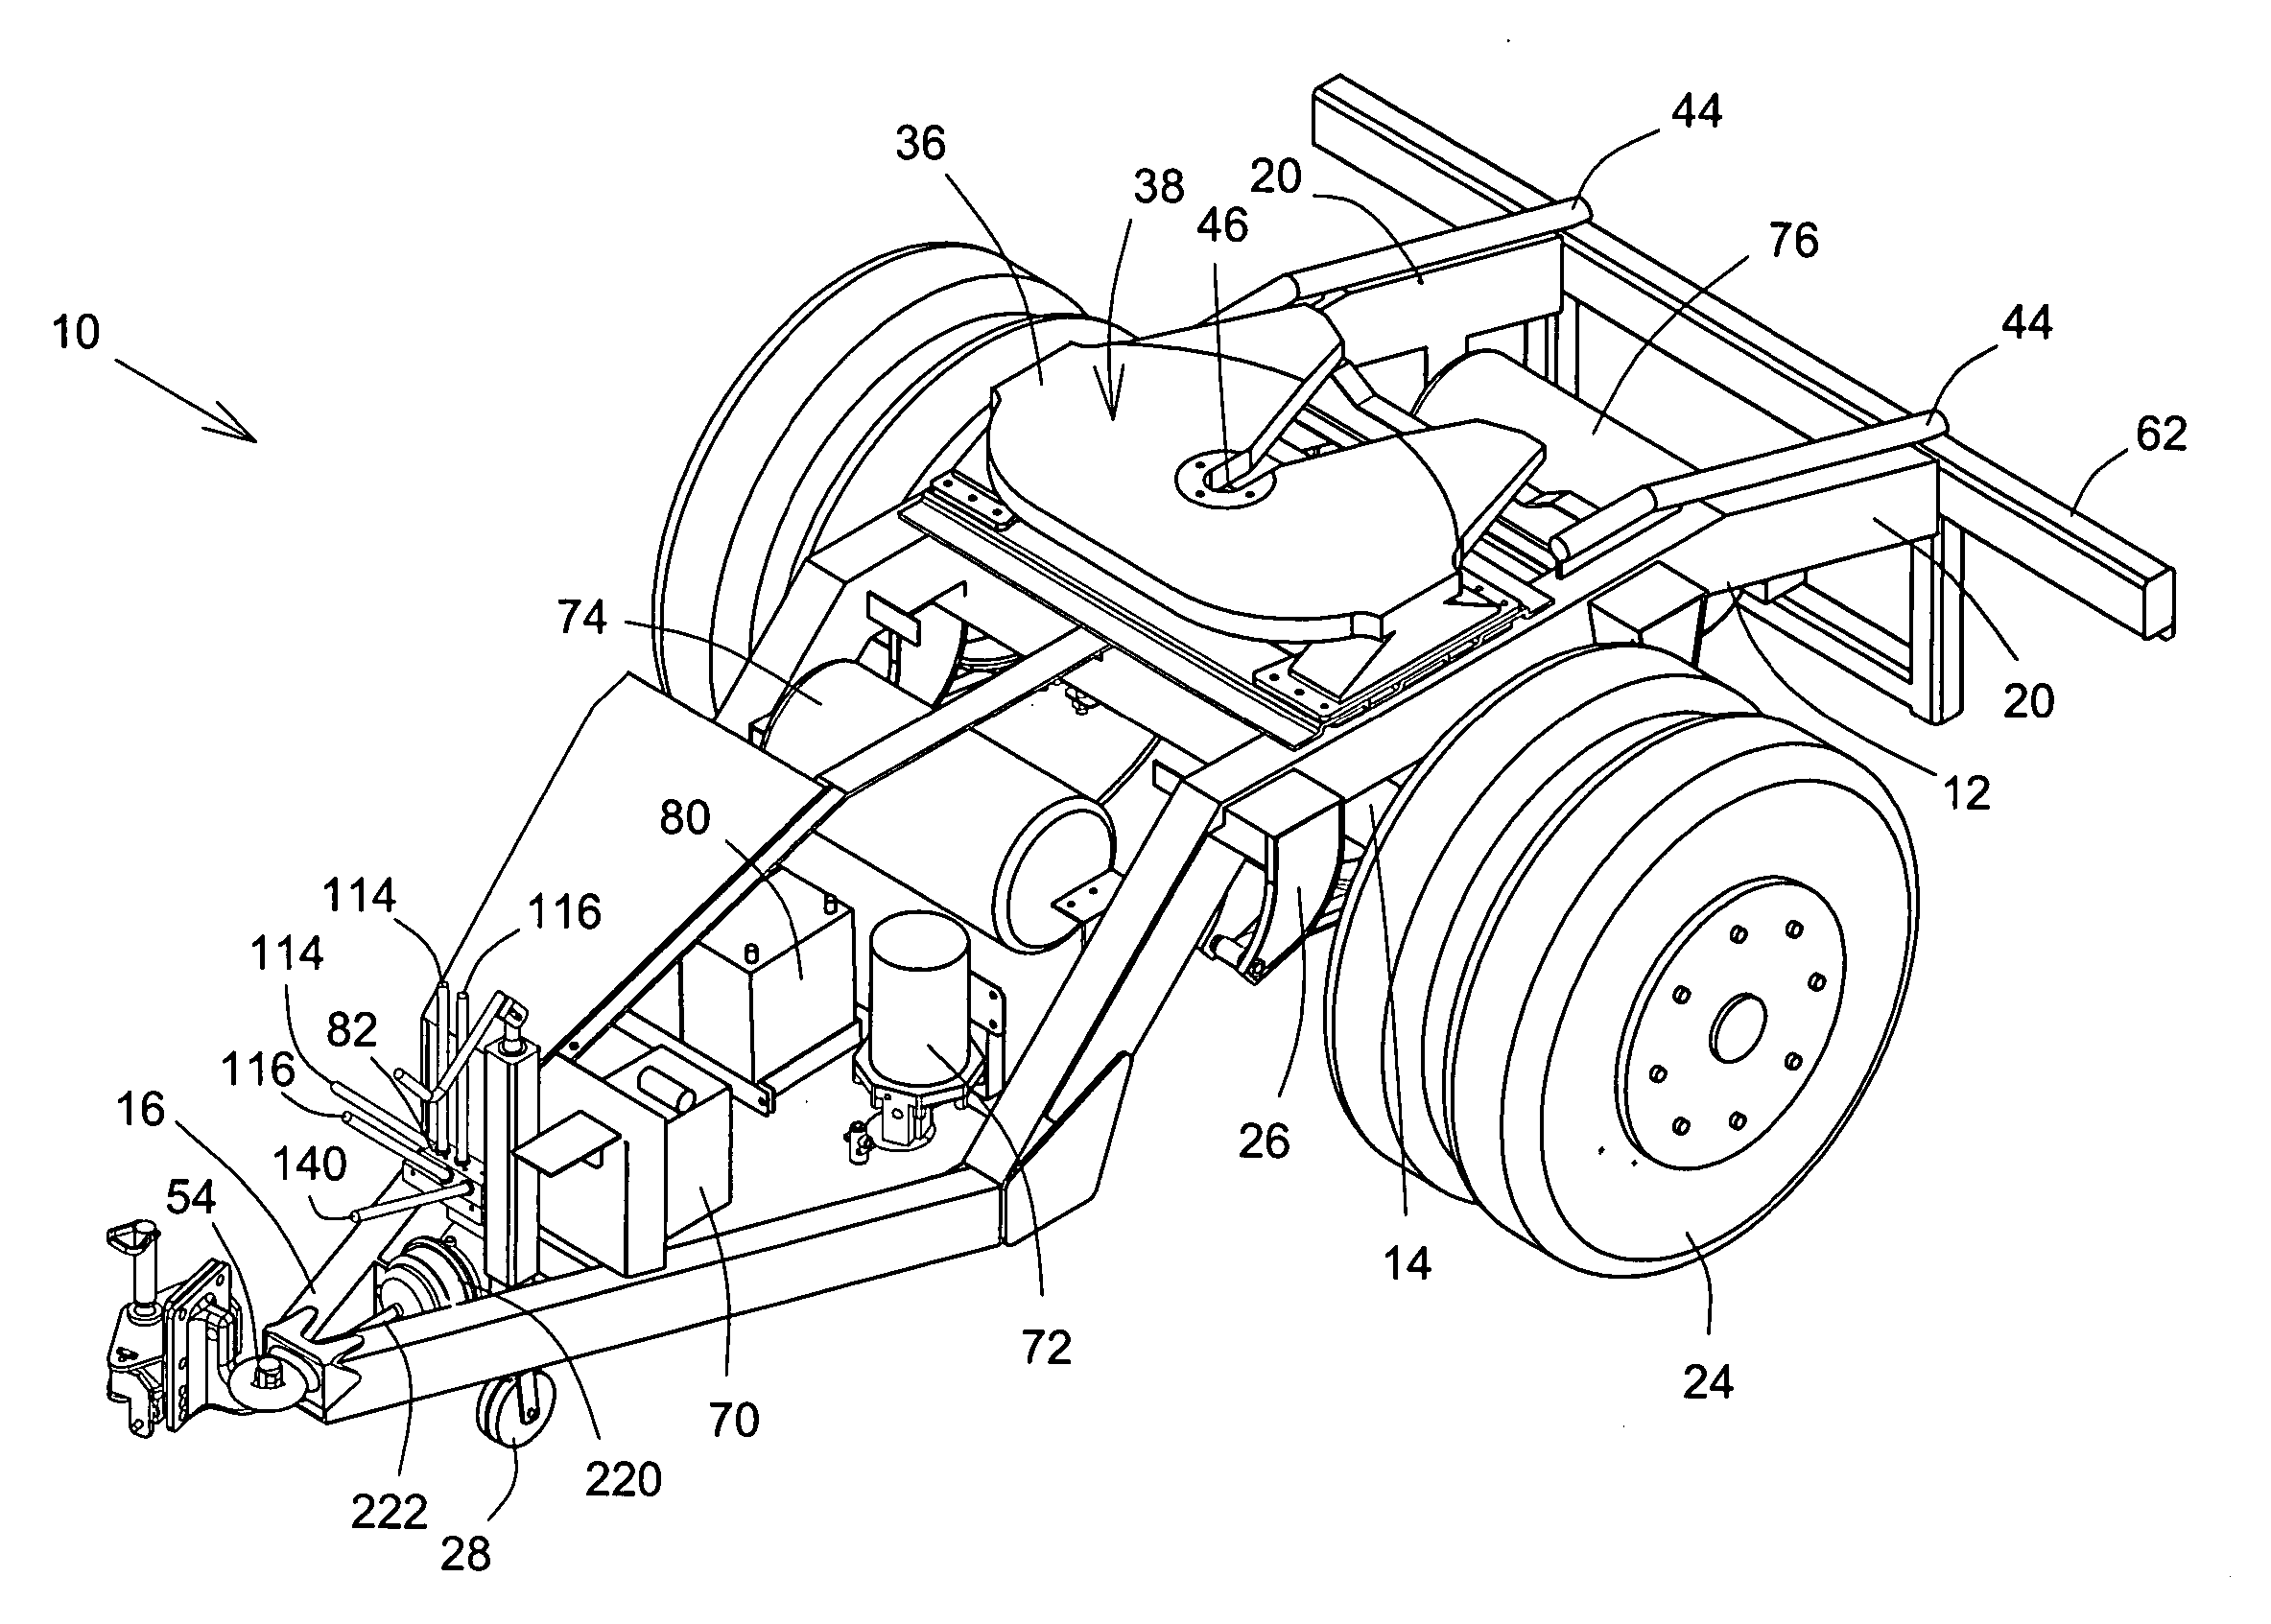 Off-road dolly for displacement of a trailer in an off-road environment